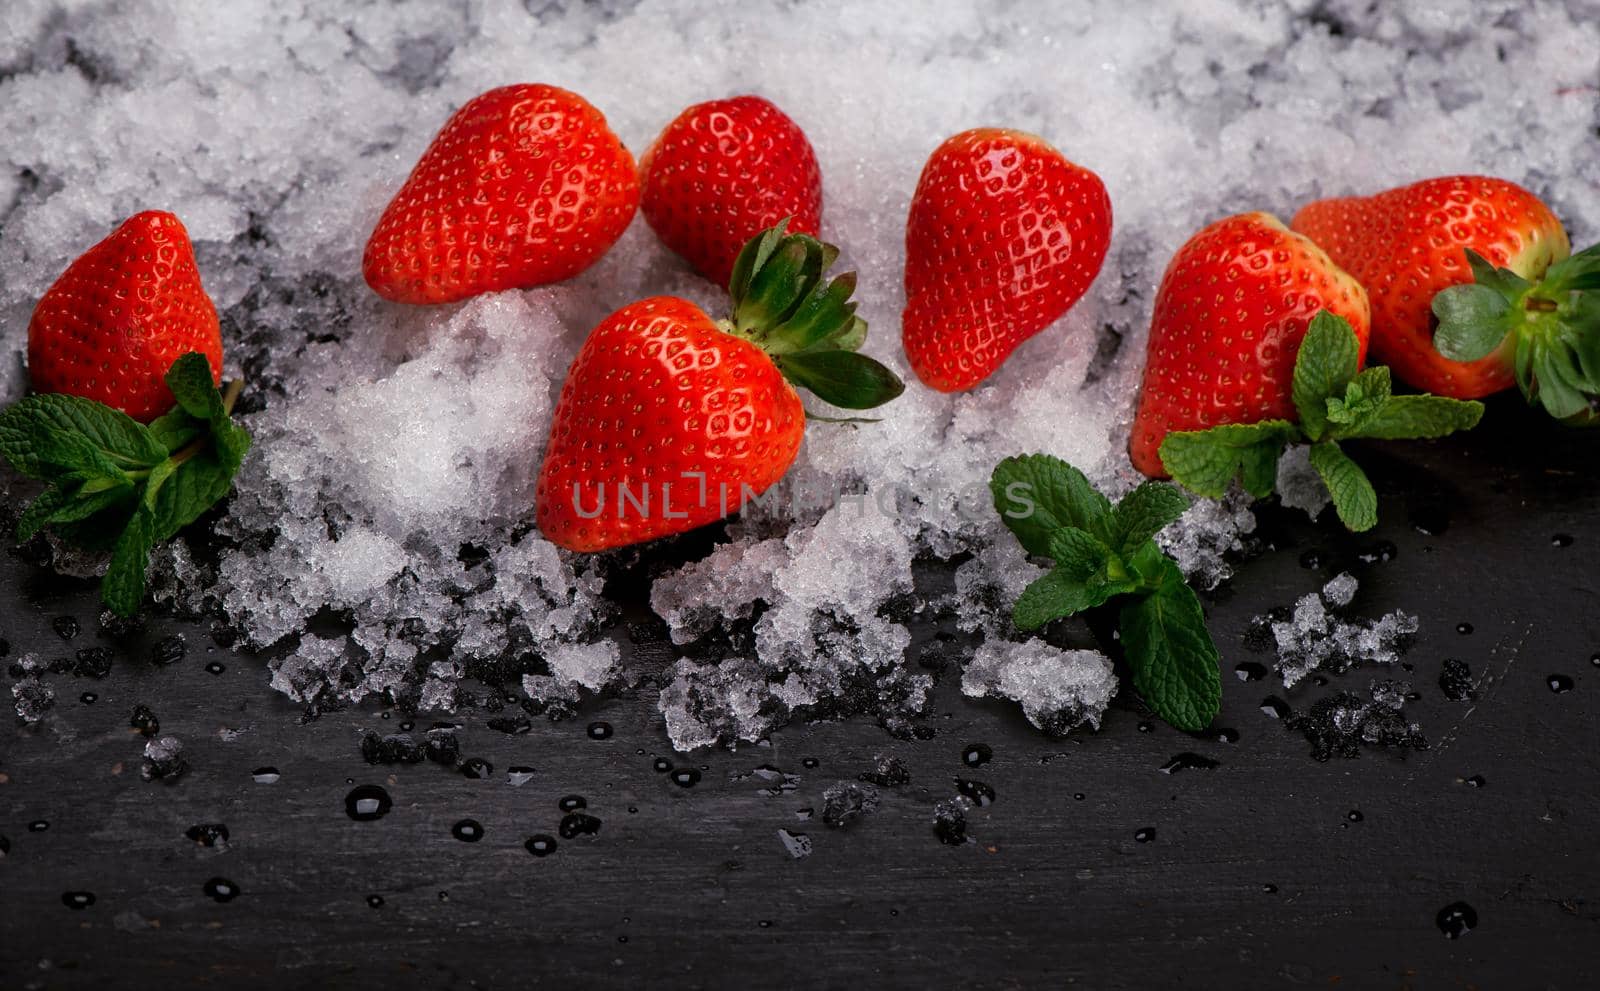 Strawberries, mint and iceon the black background by aprilphoto